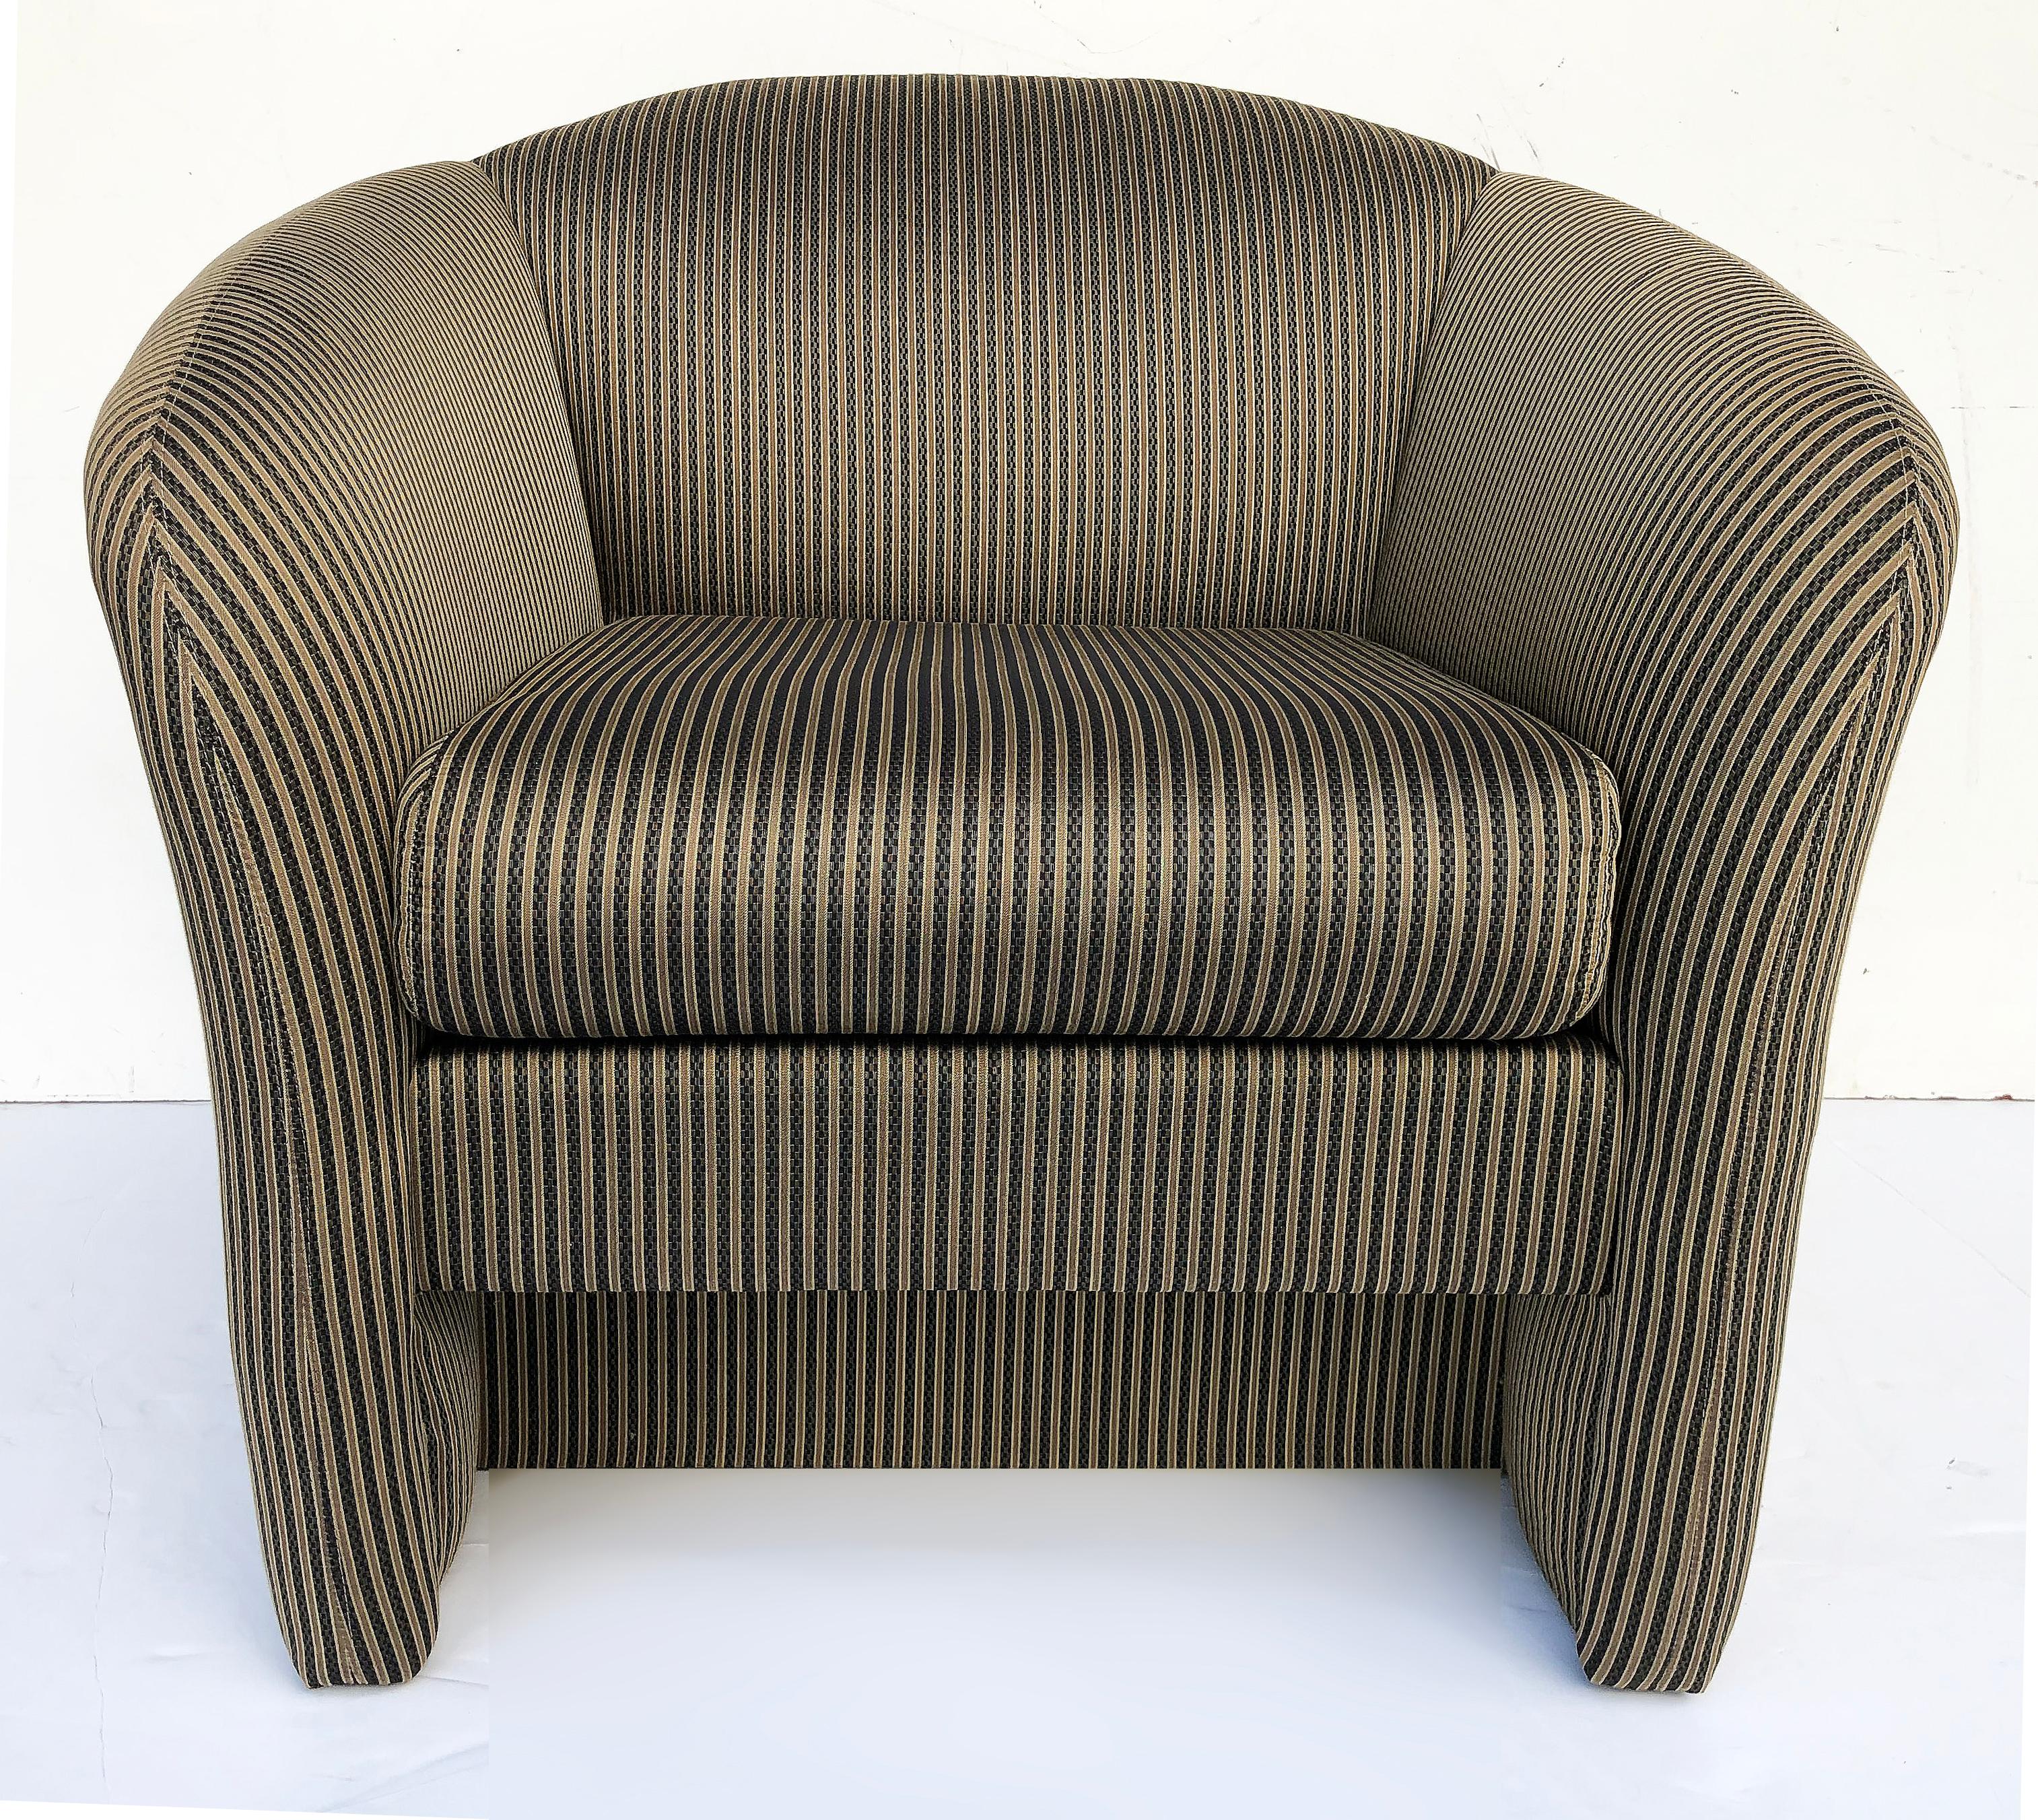 Postmodern overscale custom lounge club chairs, a pair

Offered for sale is a pair of custom made lounge chairs from a High Point, North Carolina Manufacturer. These high-end chairs are well-made with great craftsmanship and are quite comfortable.